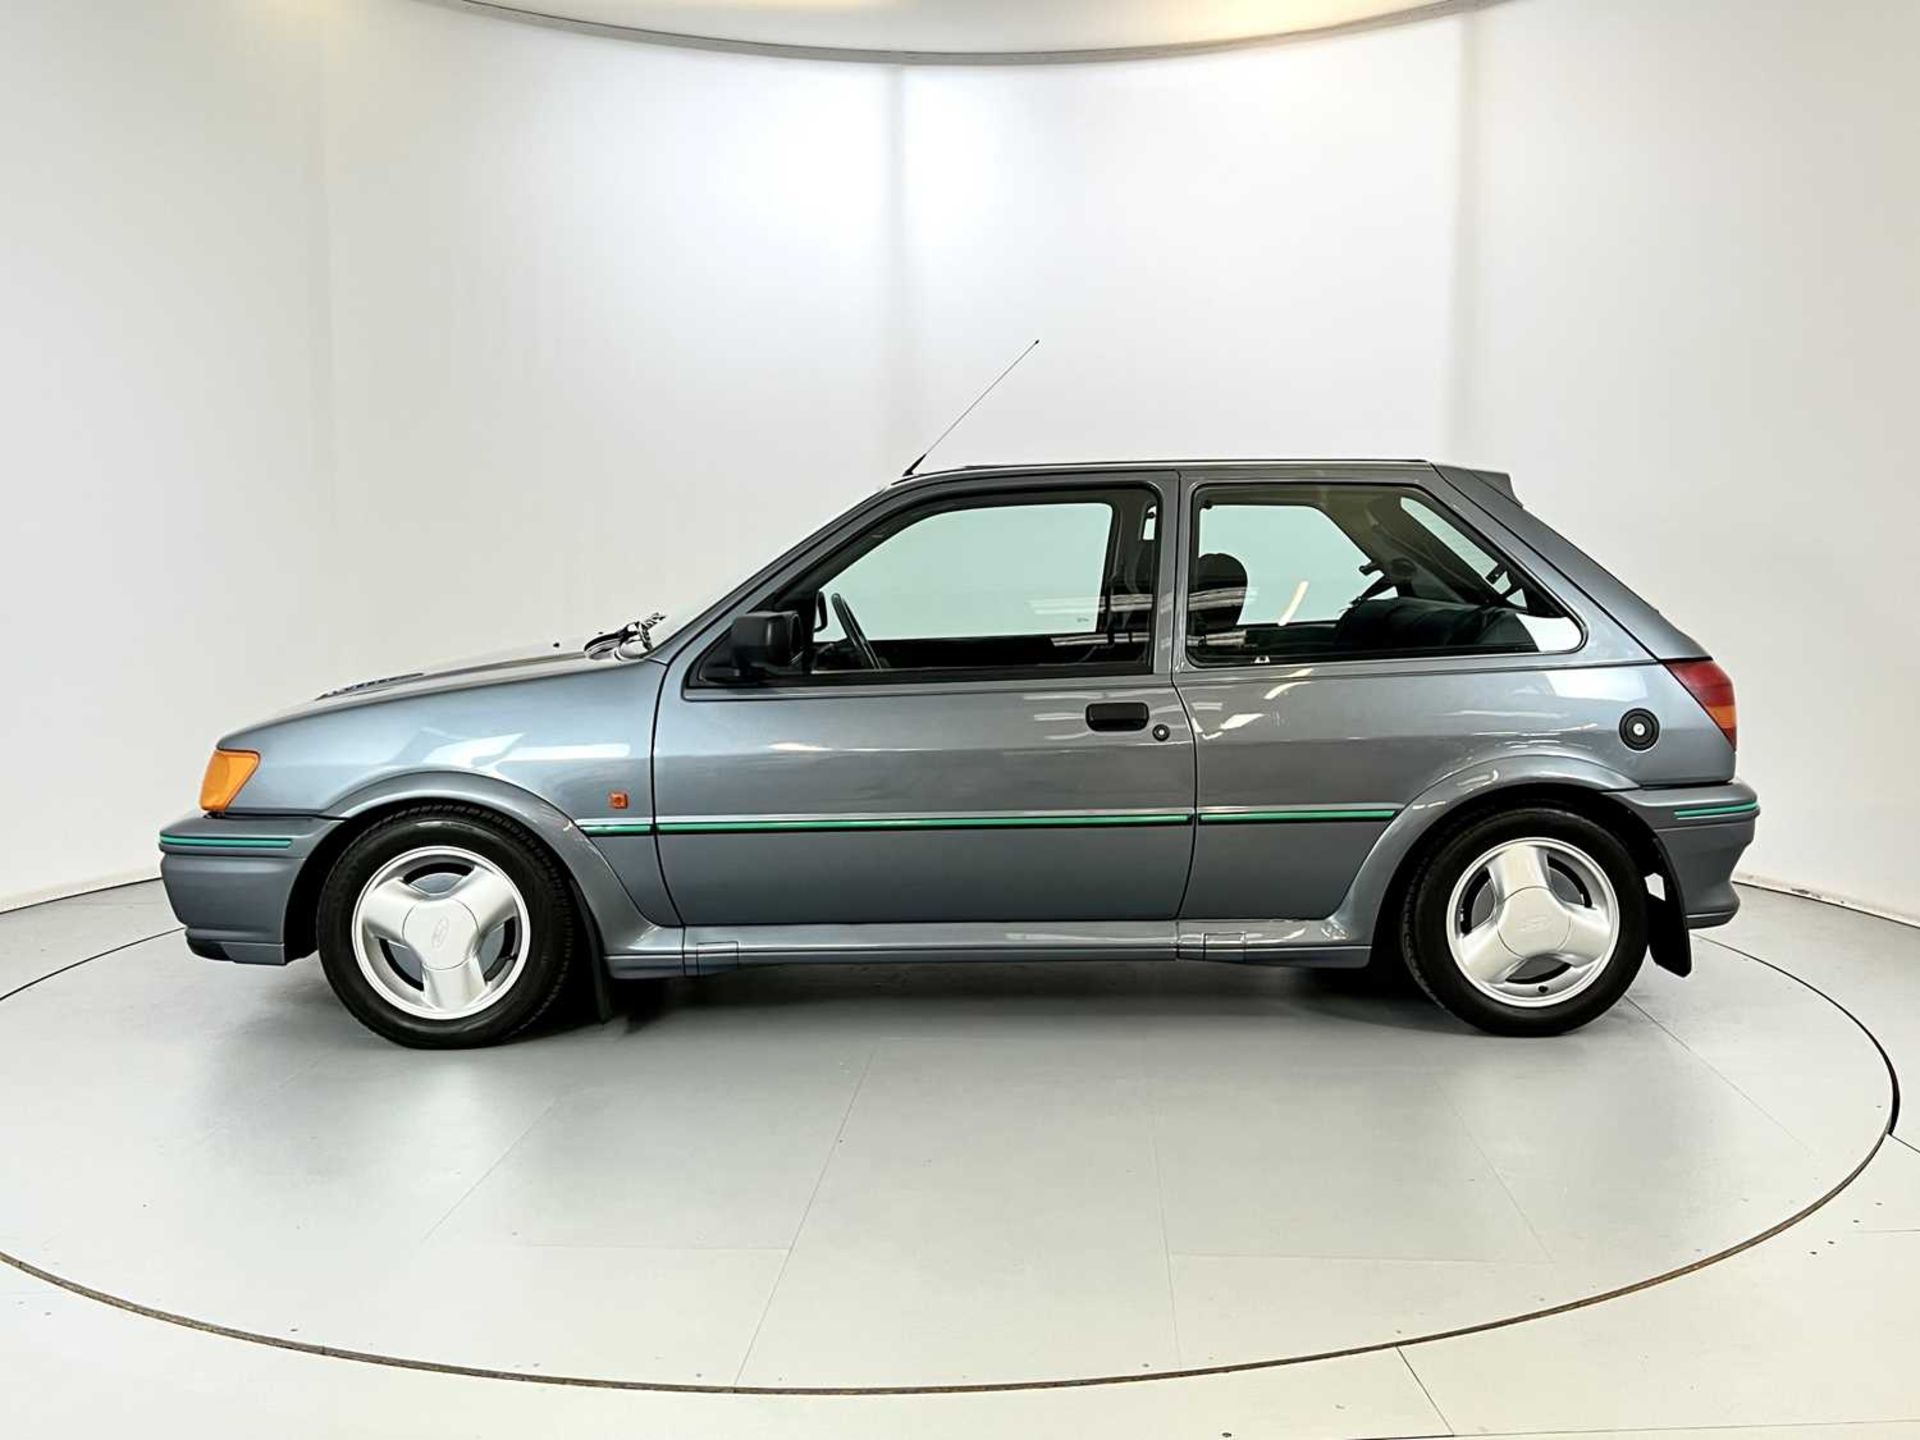 1991 Ford Fiesta RS Turbo - Image 5 of 32